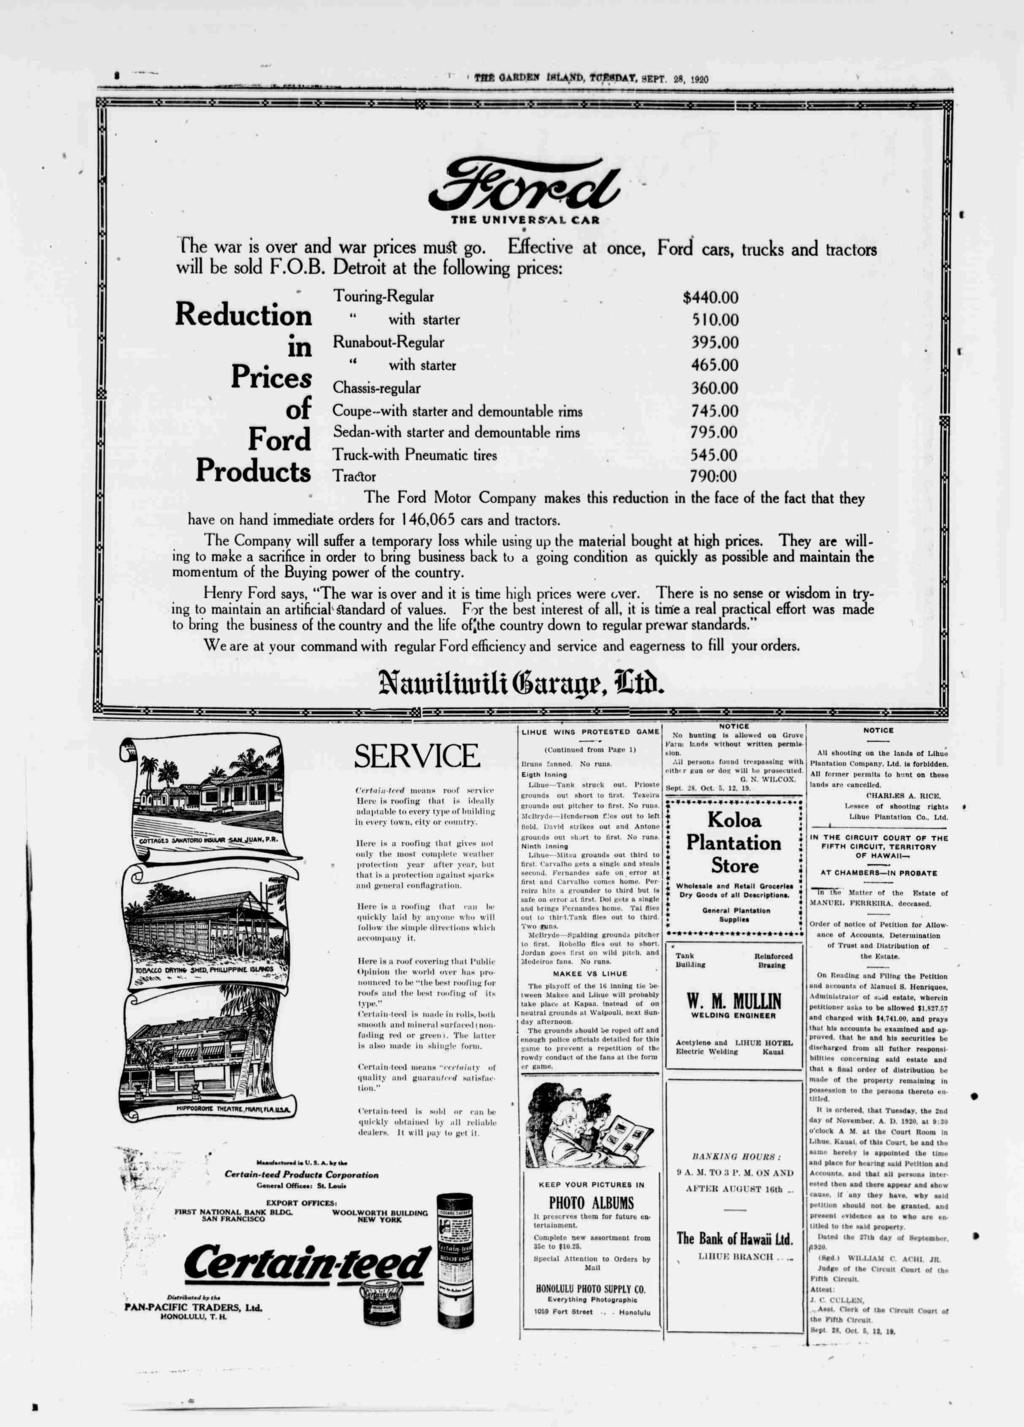 8 Tflf gaudn toatb, fapapa?, sept. 28, 1920 Hff1" "! 8 ff KJ NX ft THE UNVERSAL CAR The war s over and war prces mut go. Effectve at once, Ford cars, trucks and tractors wll be sold F.O.B.